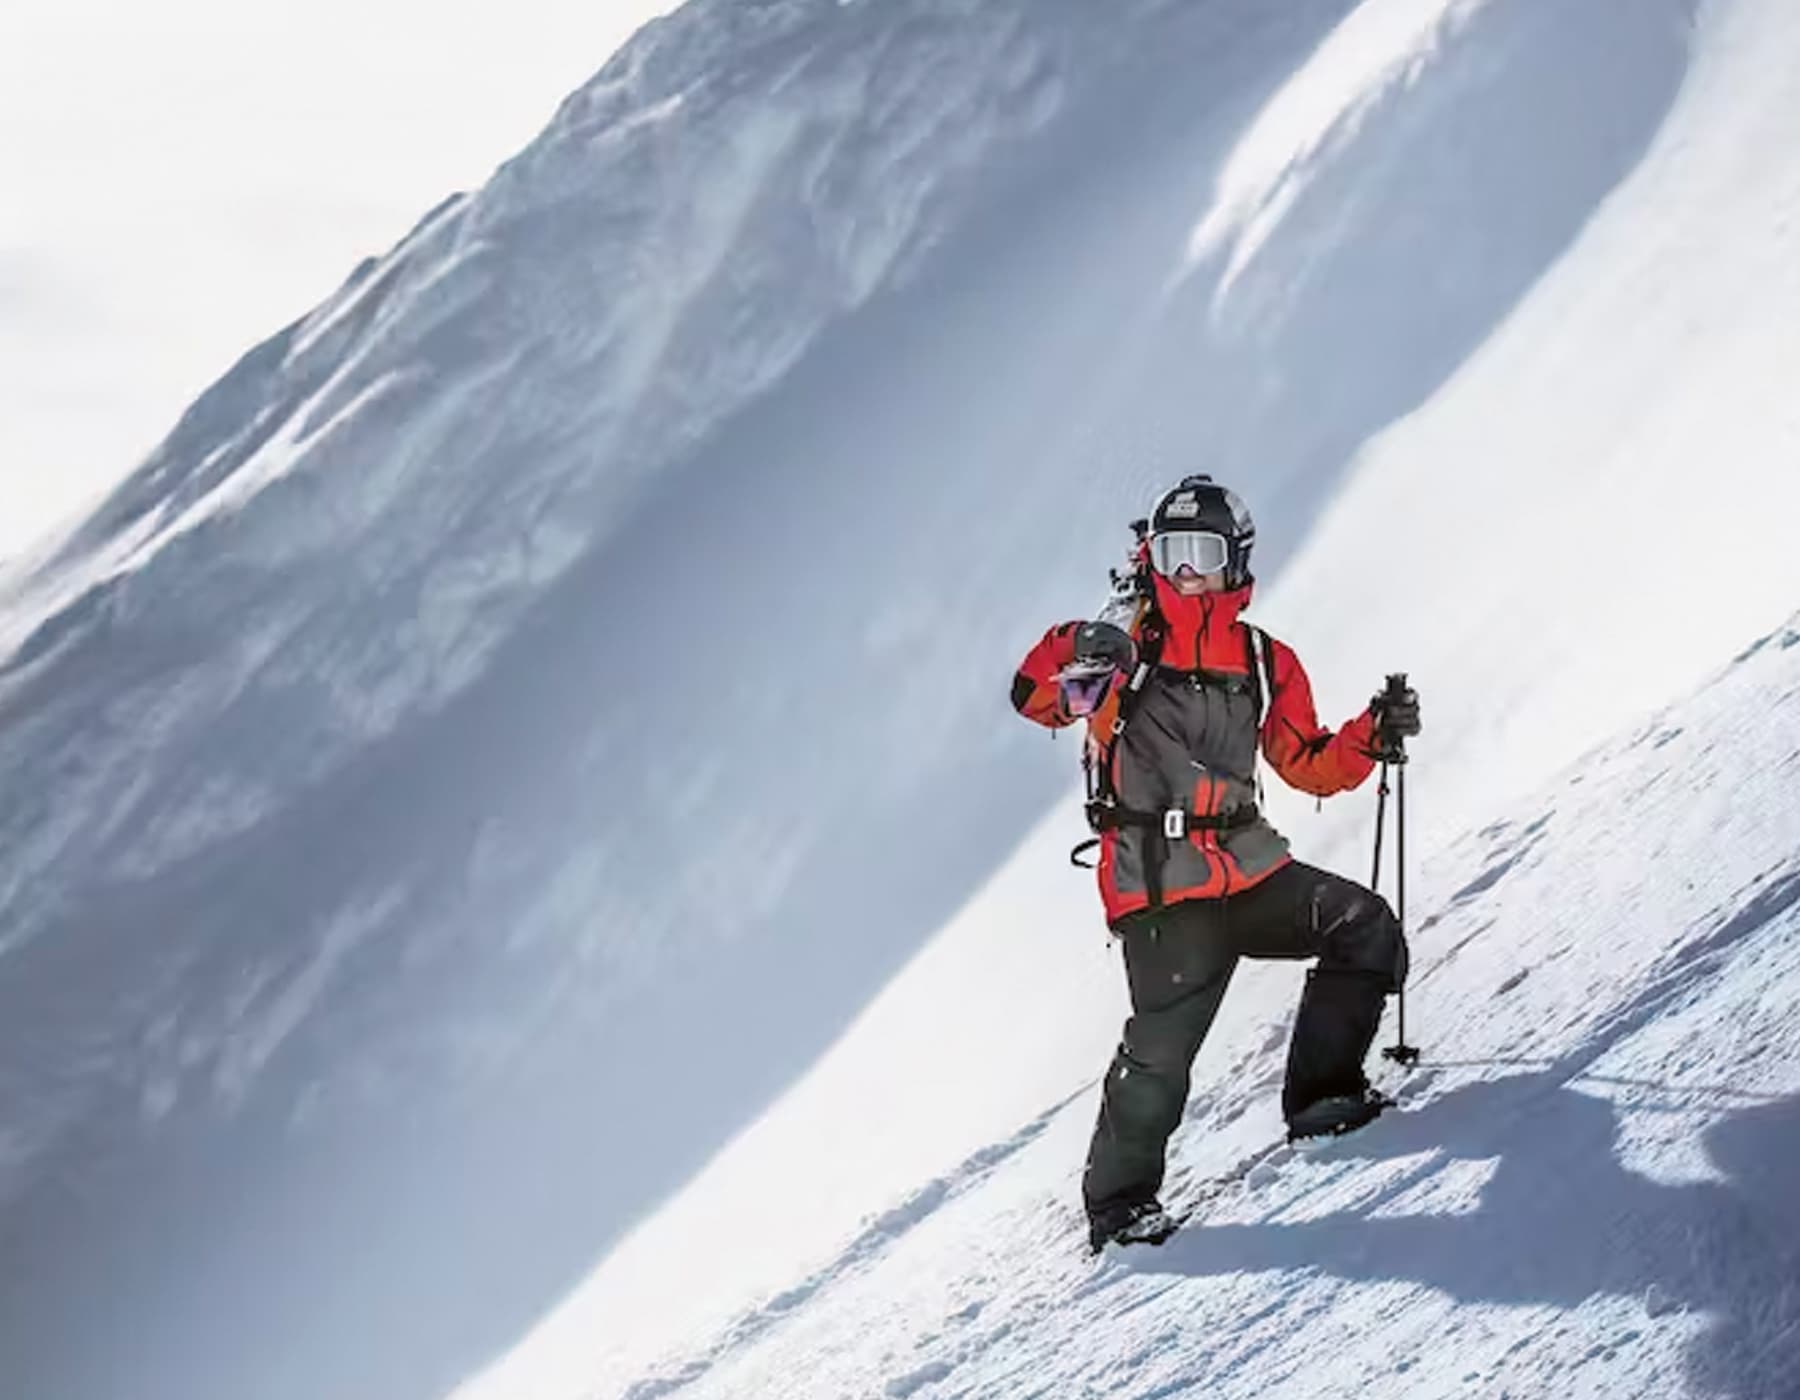 Hestra Athlete Chad Sayers standing on a steep mountain side in full ski gear, helmet and goggles carrying his skis and poles.